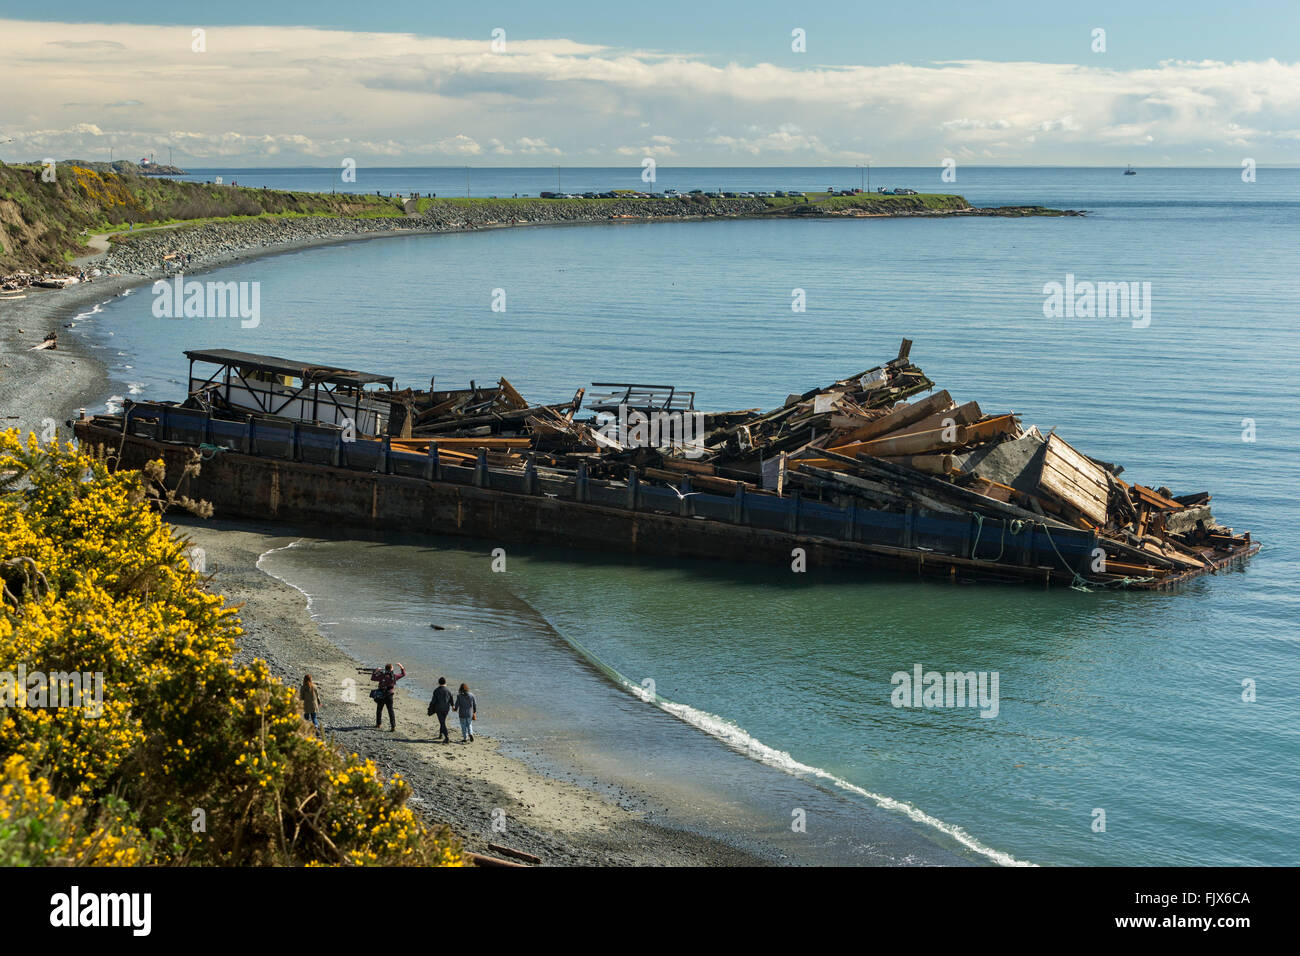 Beached stranded barge with load of junk at Clover Point beach-Victoria, British Columbia, Canada. Stock Photo